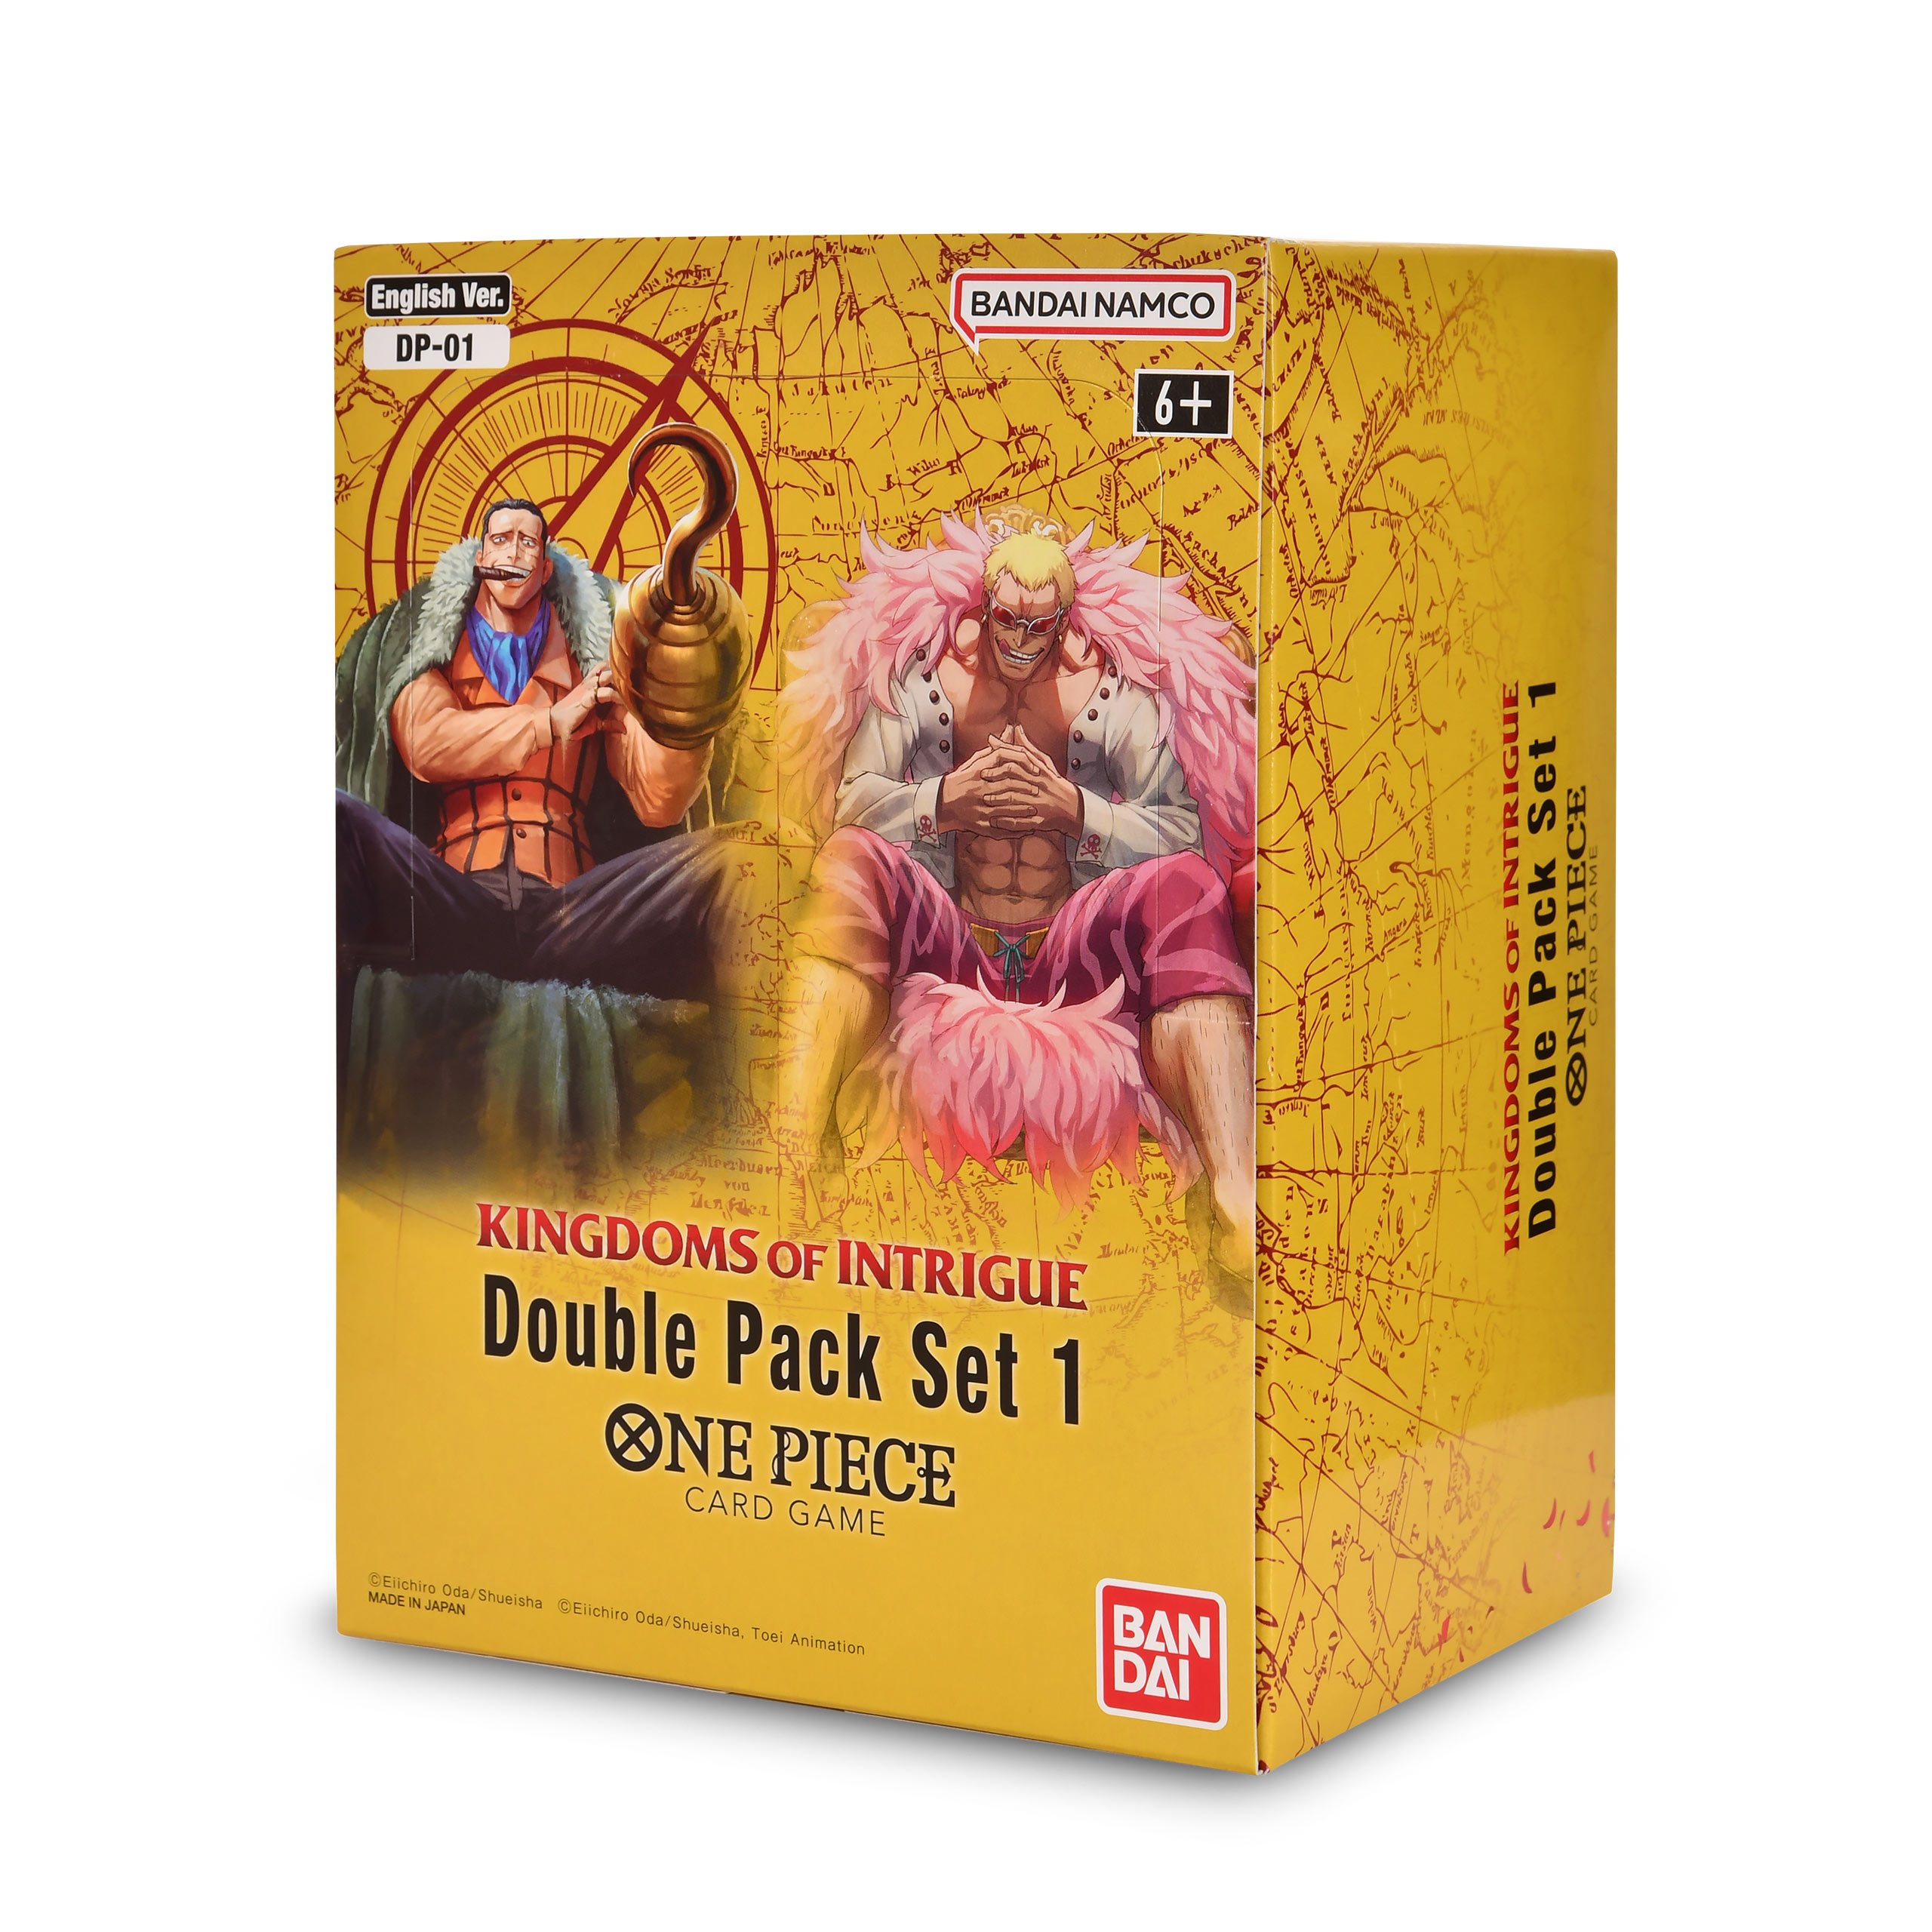 One Piece - Kingdoms of Intrigue Double Pack Set Vol.1 DP01 Booster Display